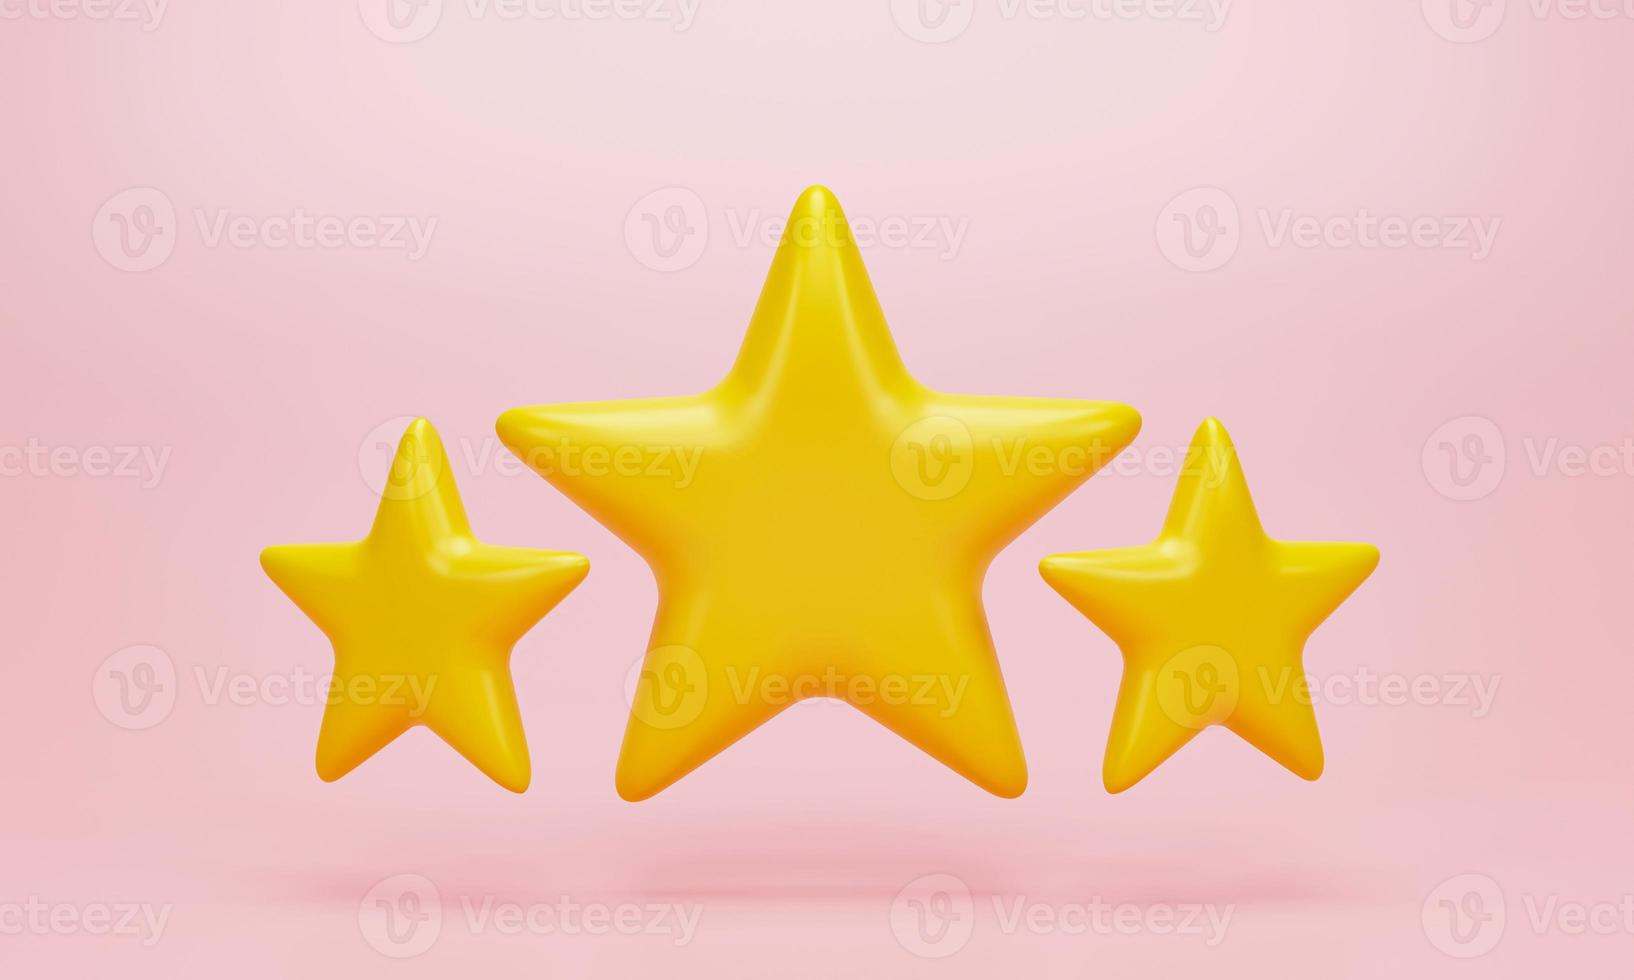 3d render 3d illustration. Three yellow star icon on pink background. Concept of Customer rating feedback. photo